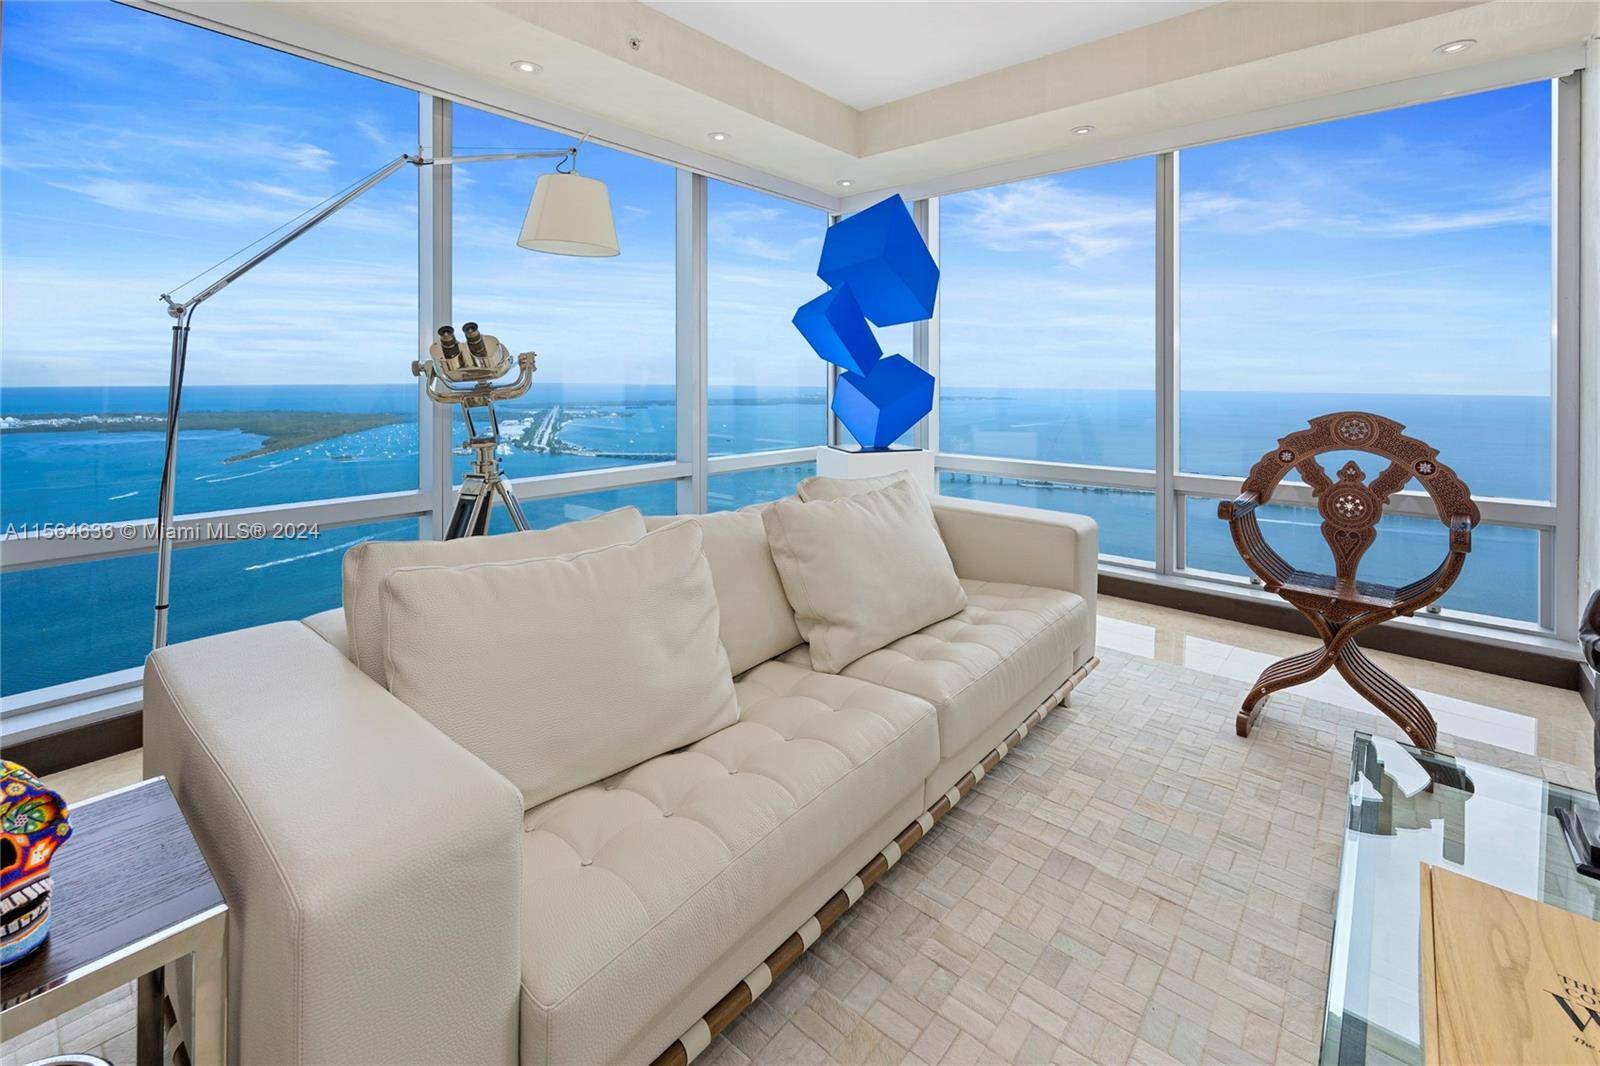 Experience the epitome of luxury living at this stunning home in the sky with breathtaking views of Brickell Bay.